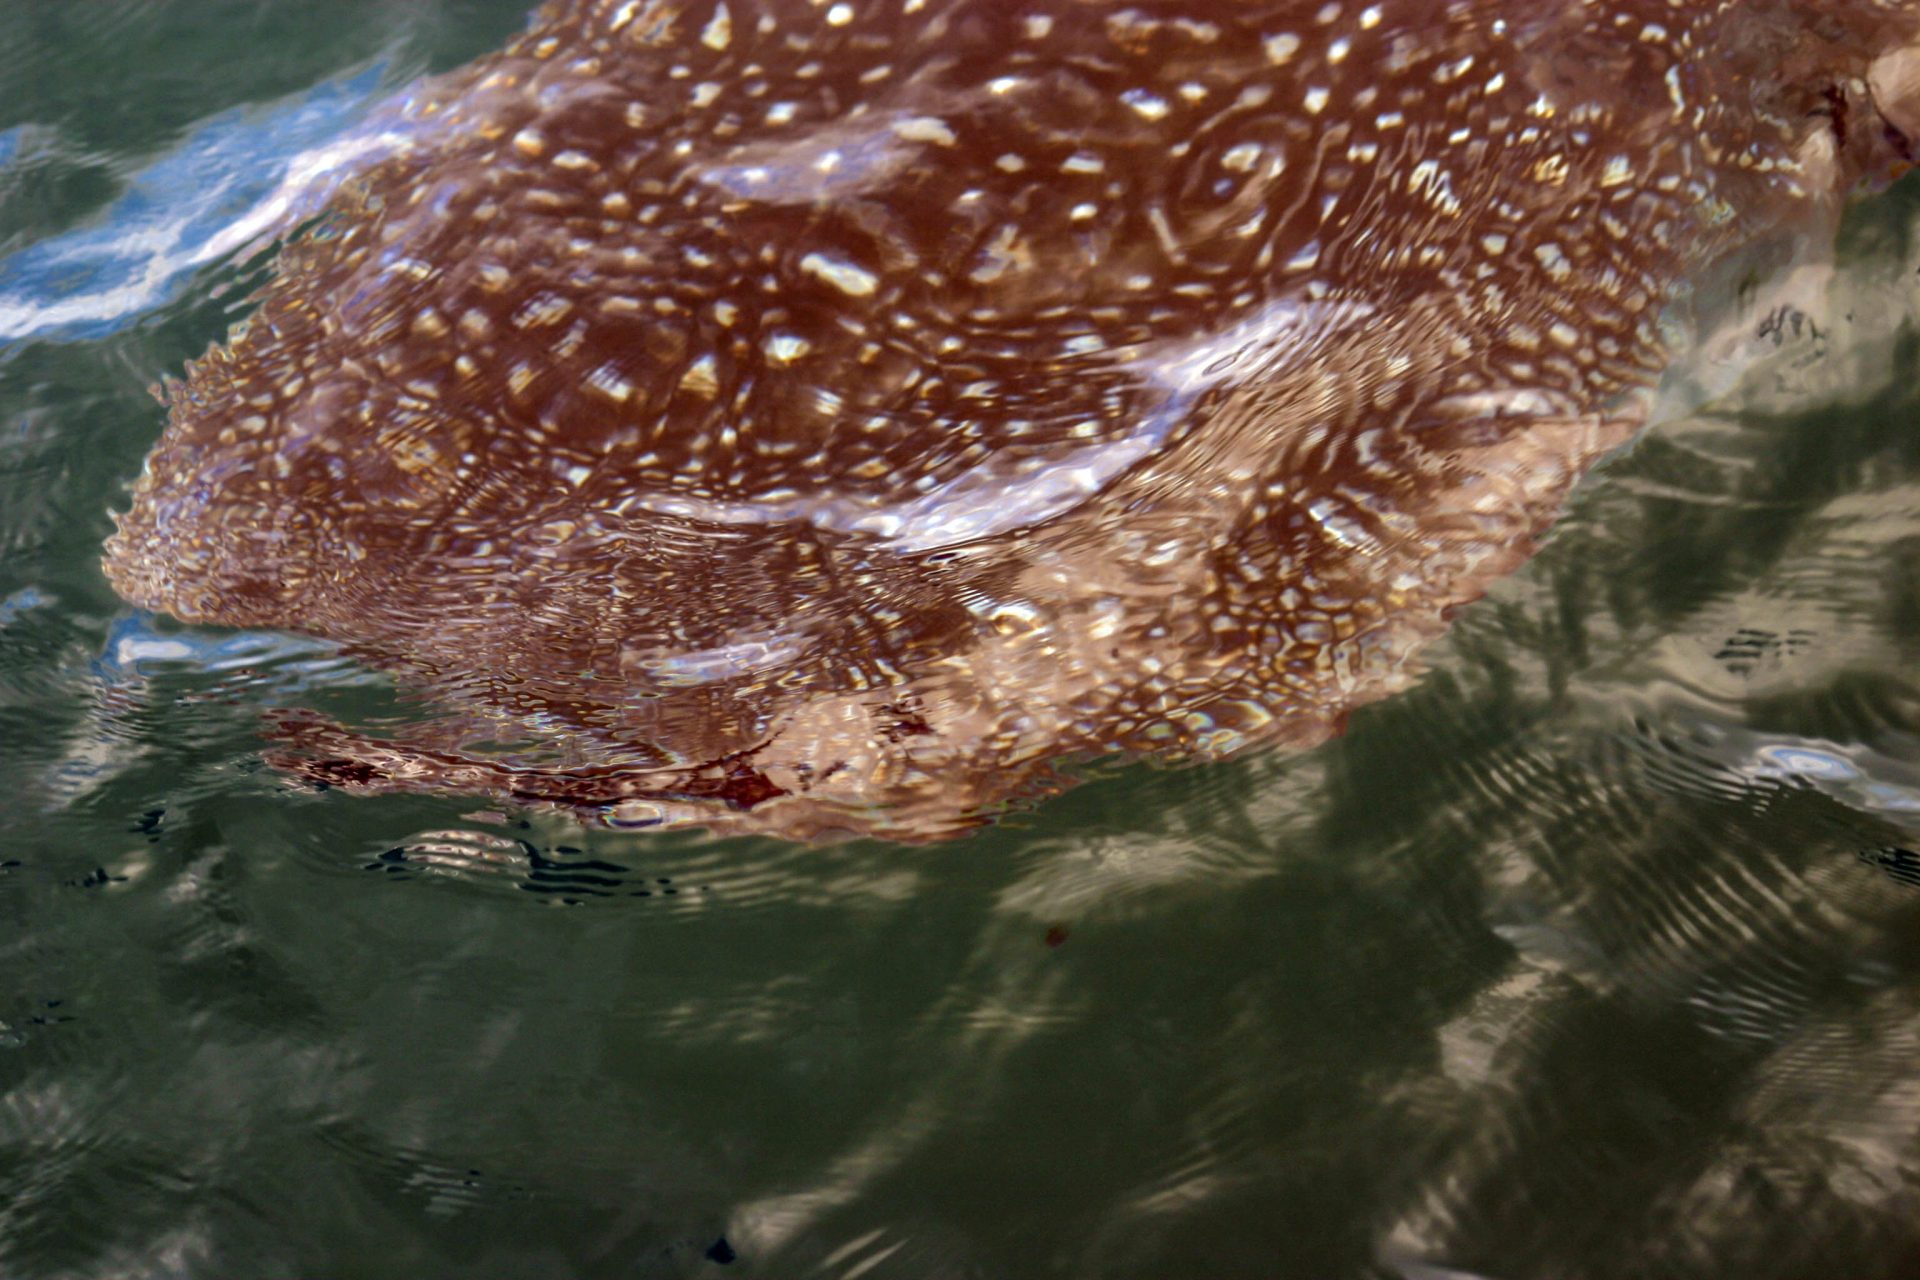 A whale shark hovers below the surface off the coast of Costa Rica - finding paradise in the osa peninsula